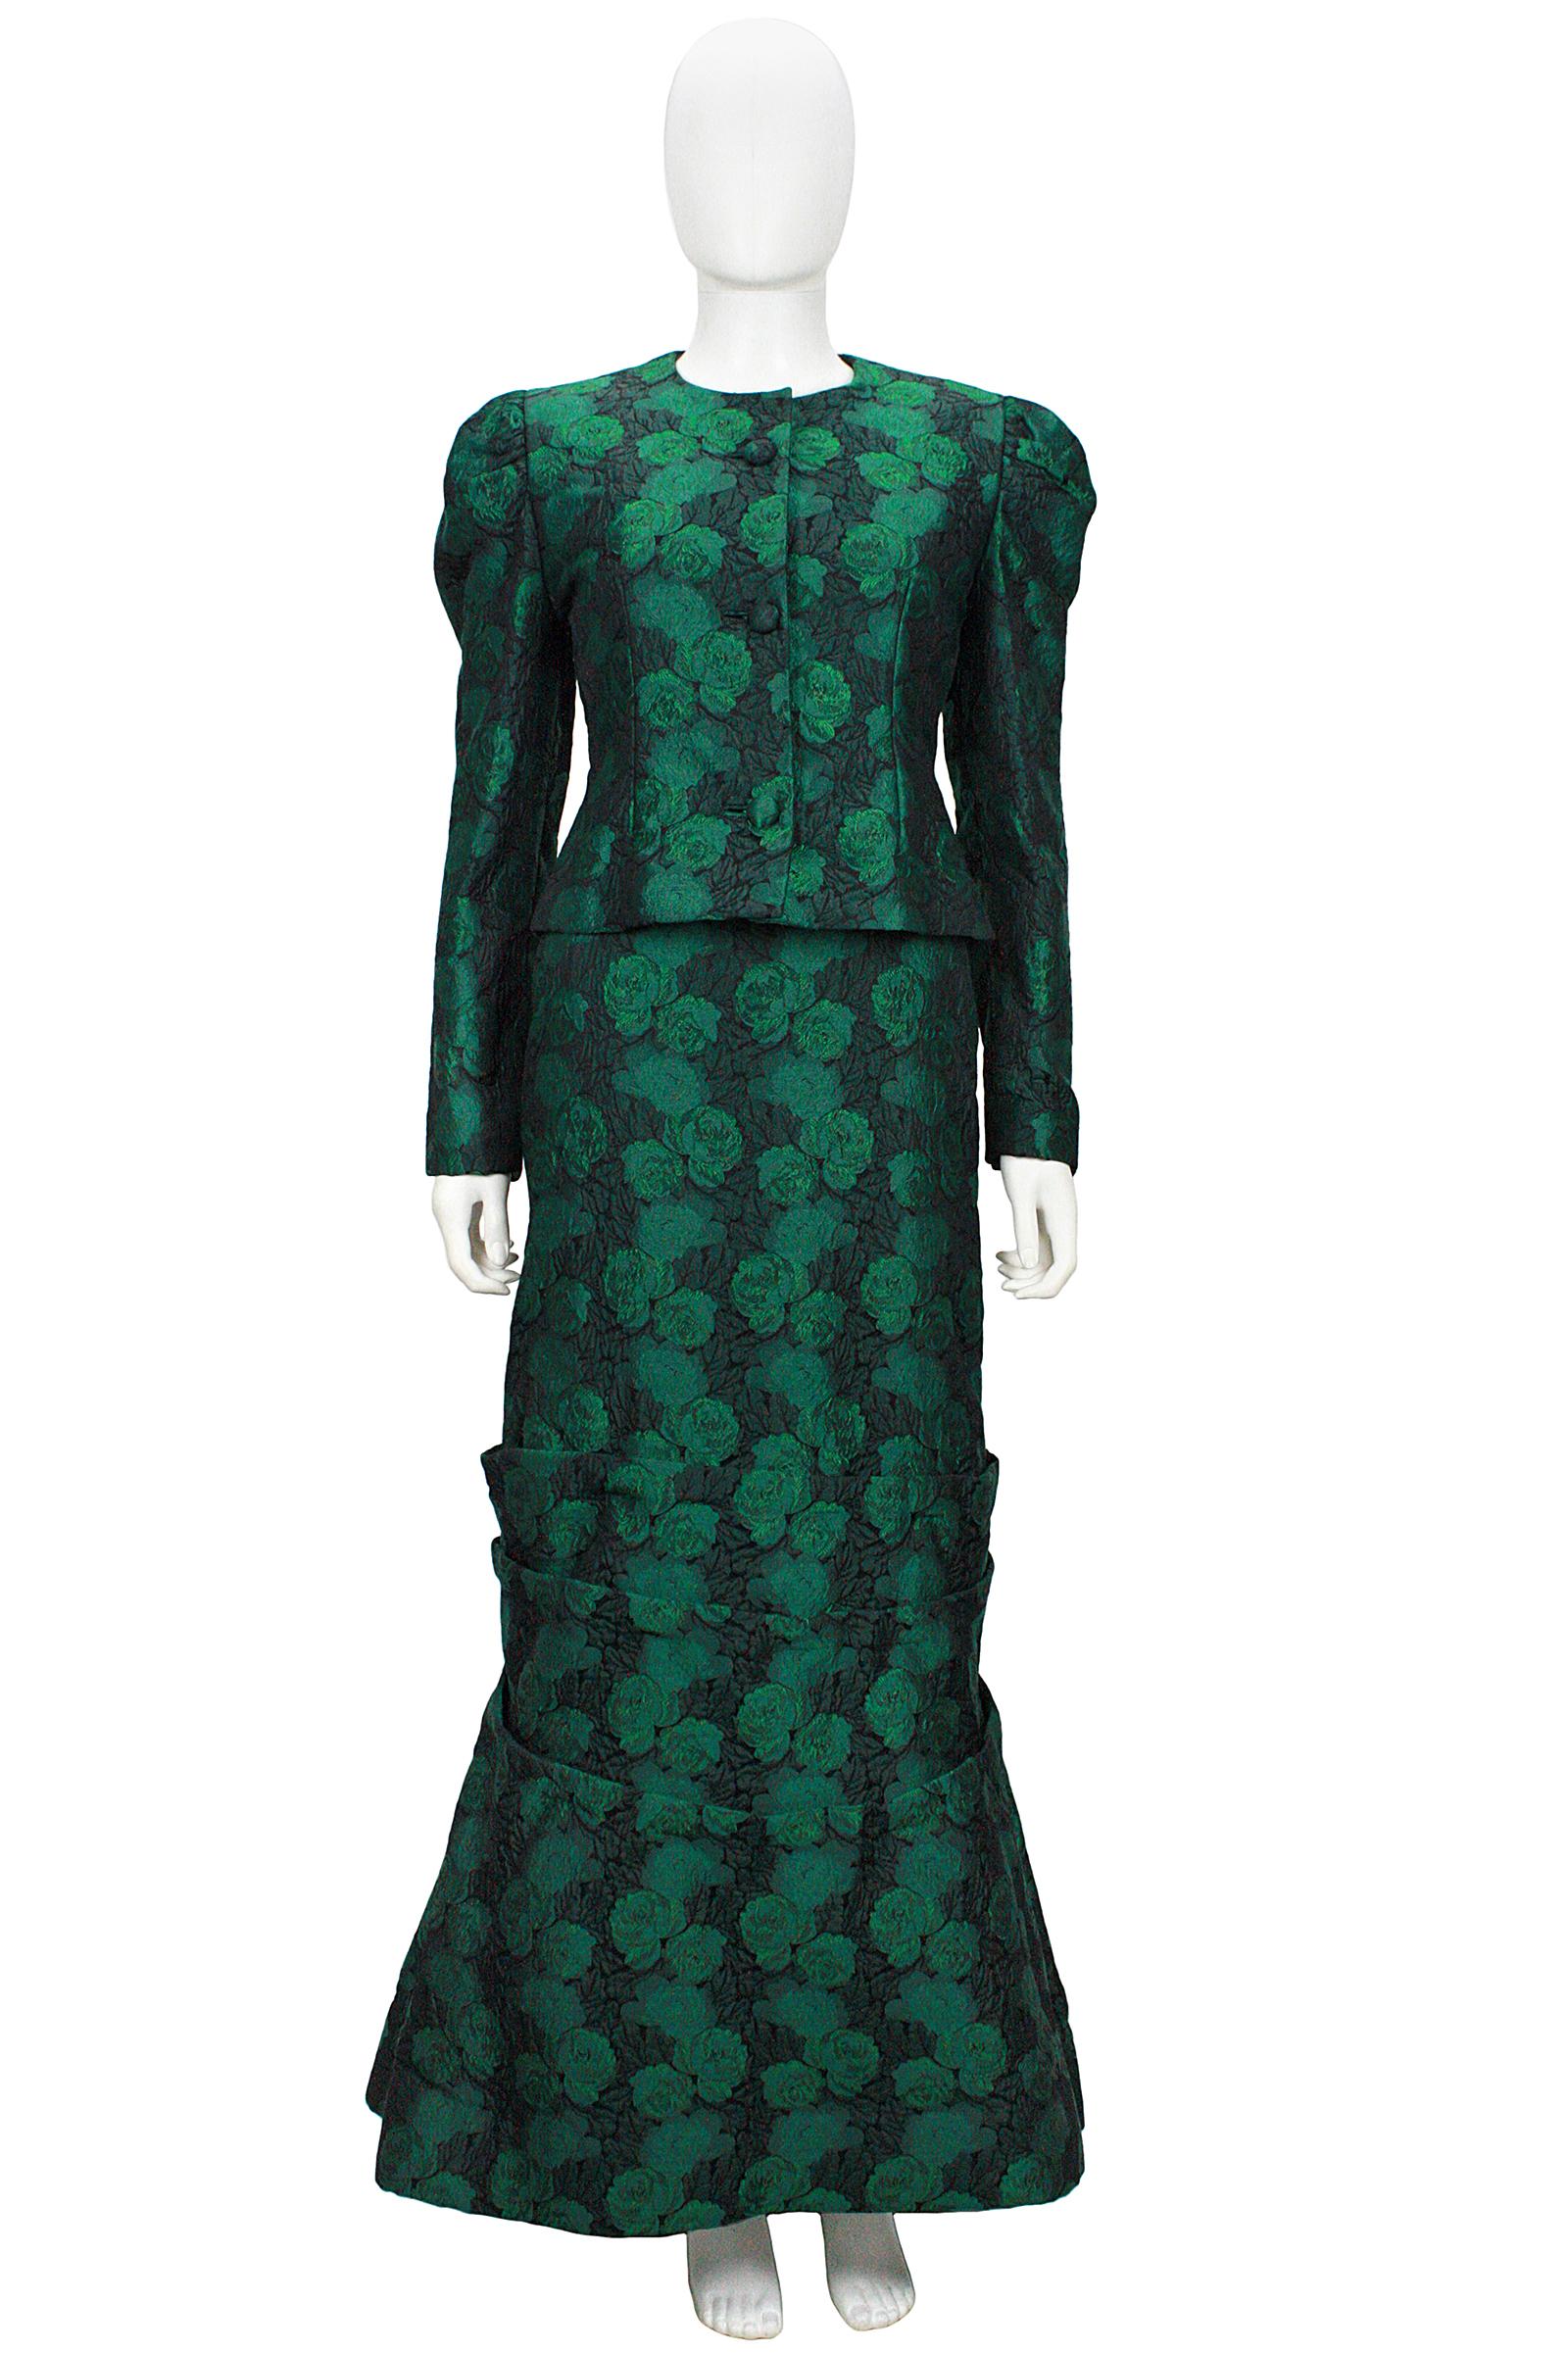 Scaasi off the shoulder gown
Green and black floral brocade 
Inner boning and lining 
Inner tulle to give the skirt fullness 
Pleat and bow skirt detail 
Fitted jacket with button closures 